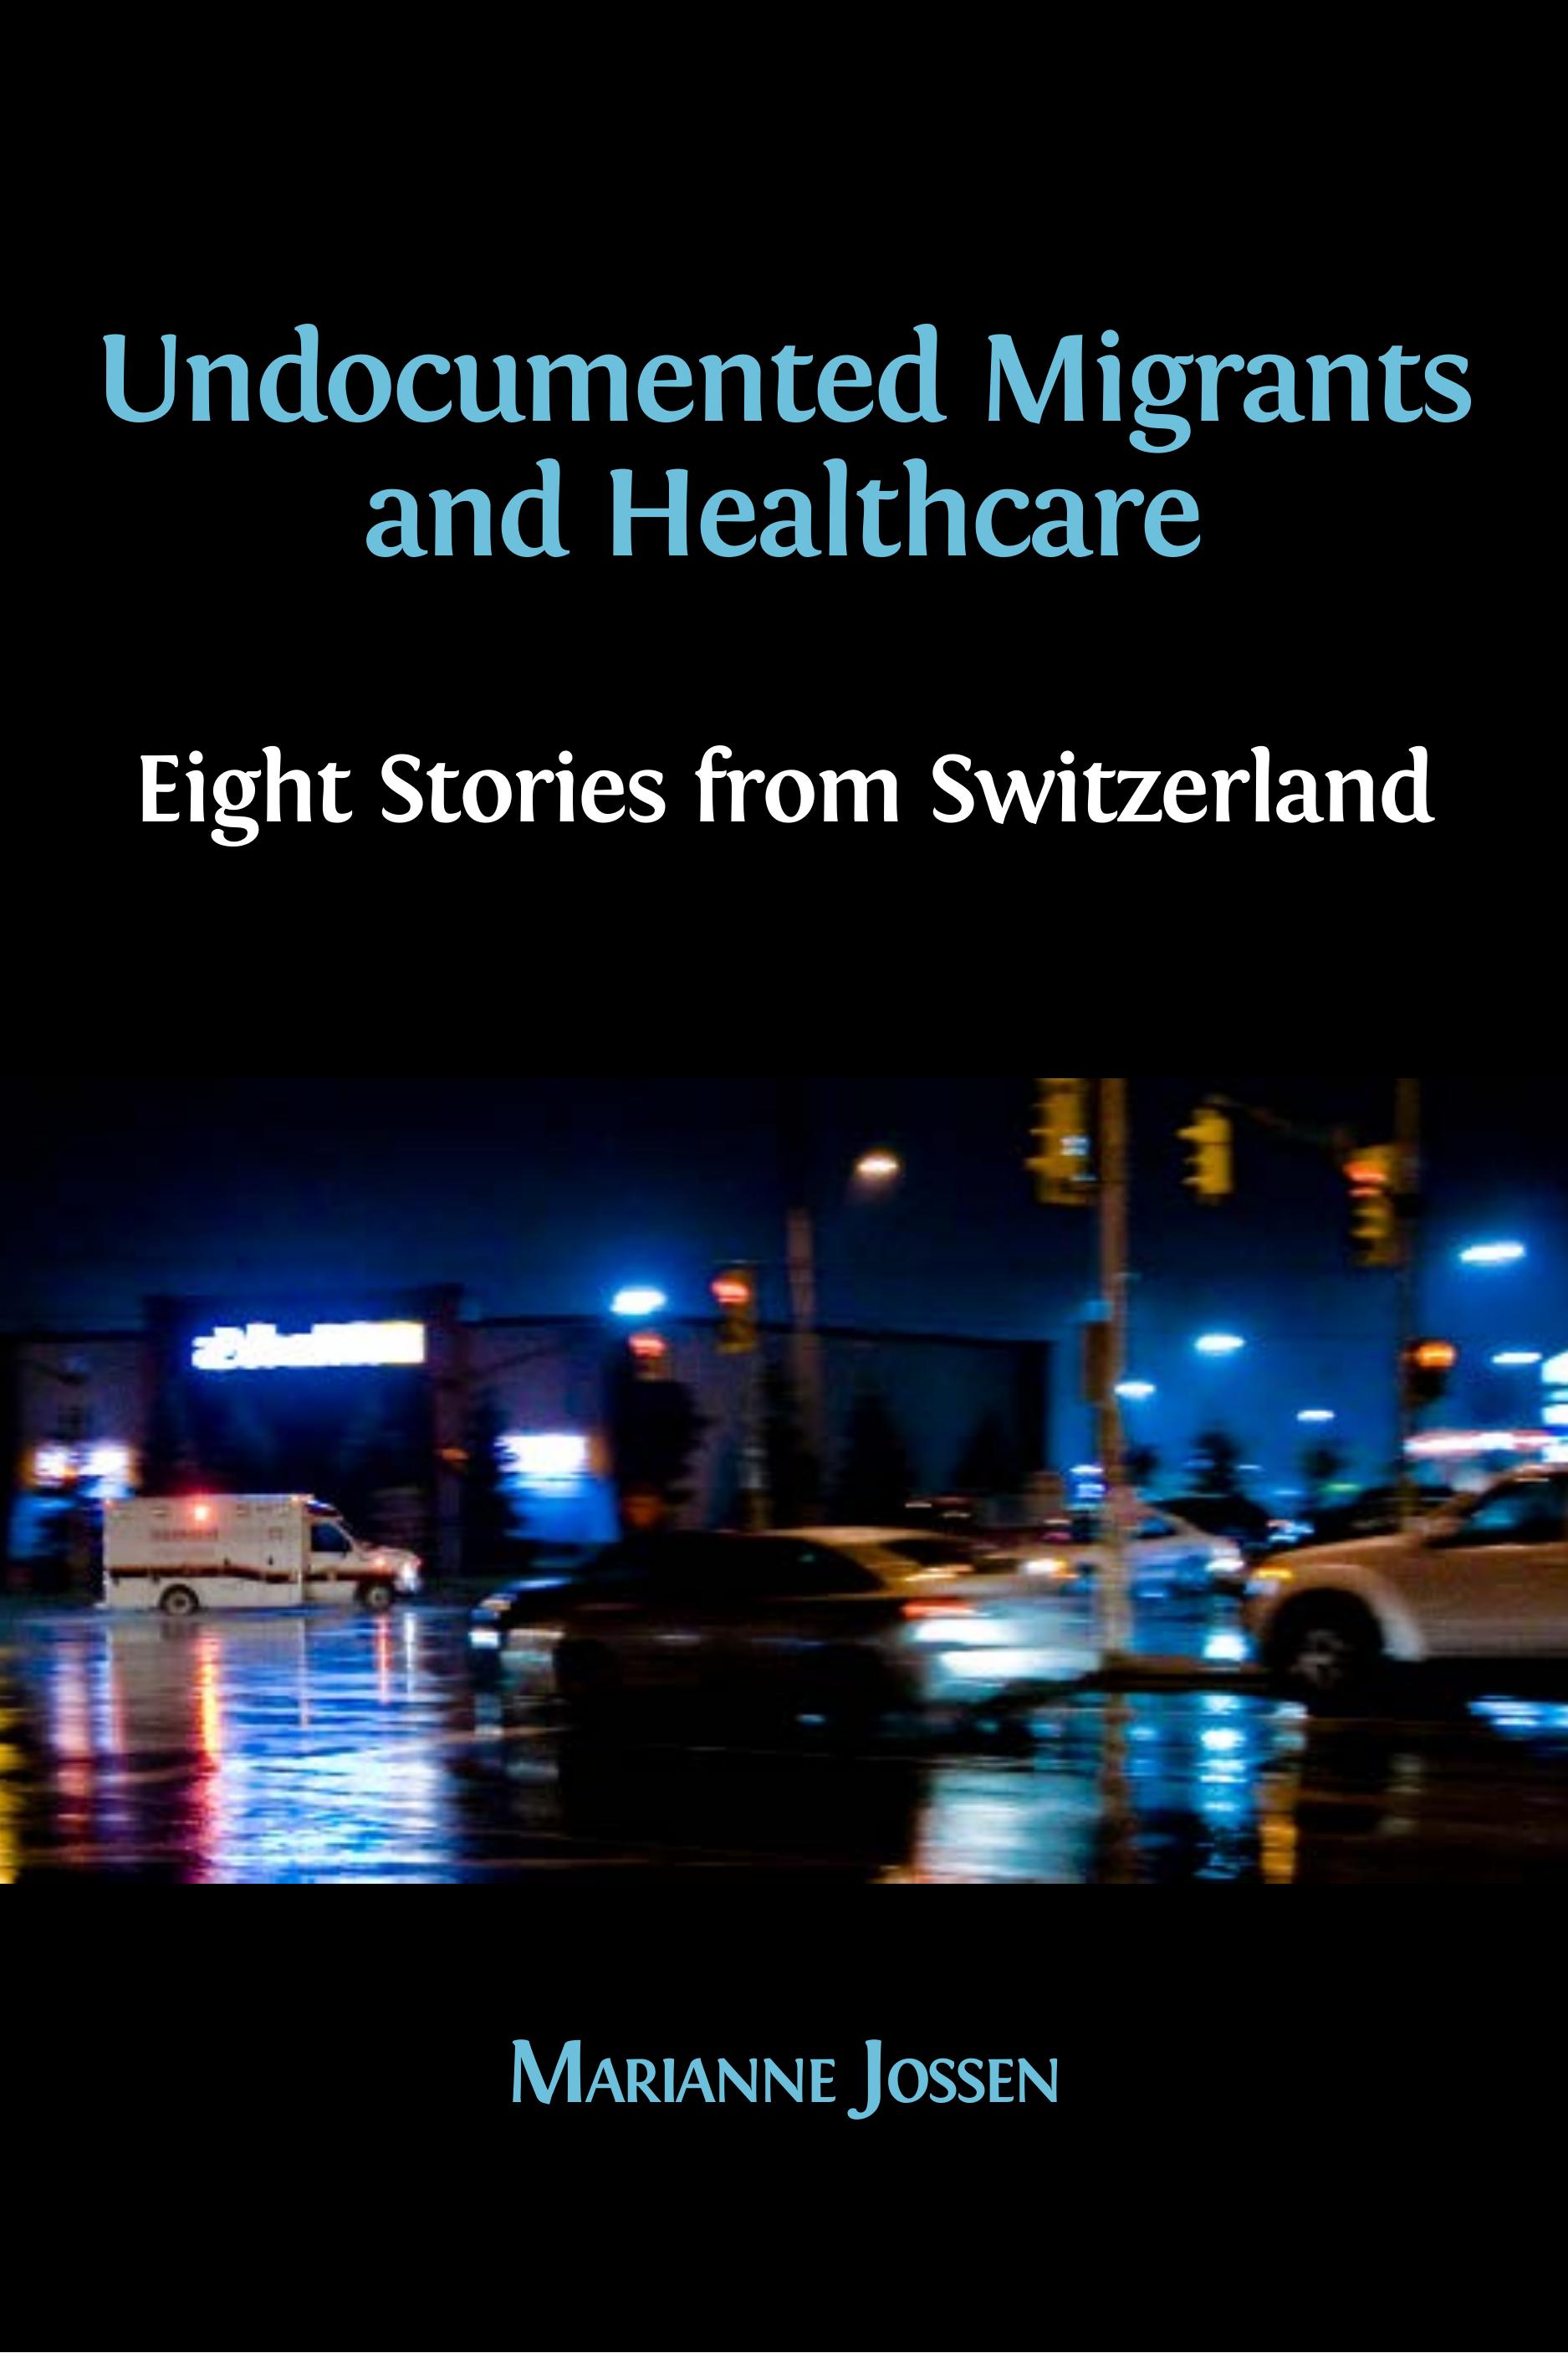 Undocumented Migrants and Healthcare: Eight Stories from Switzerland